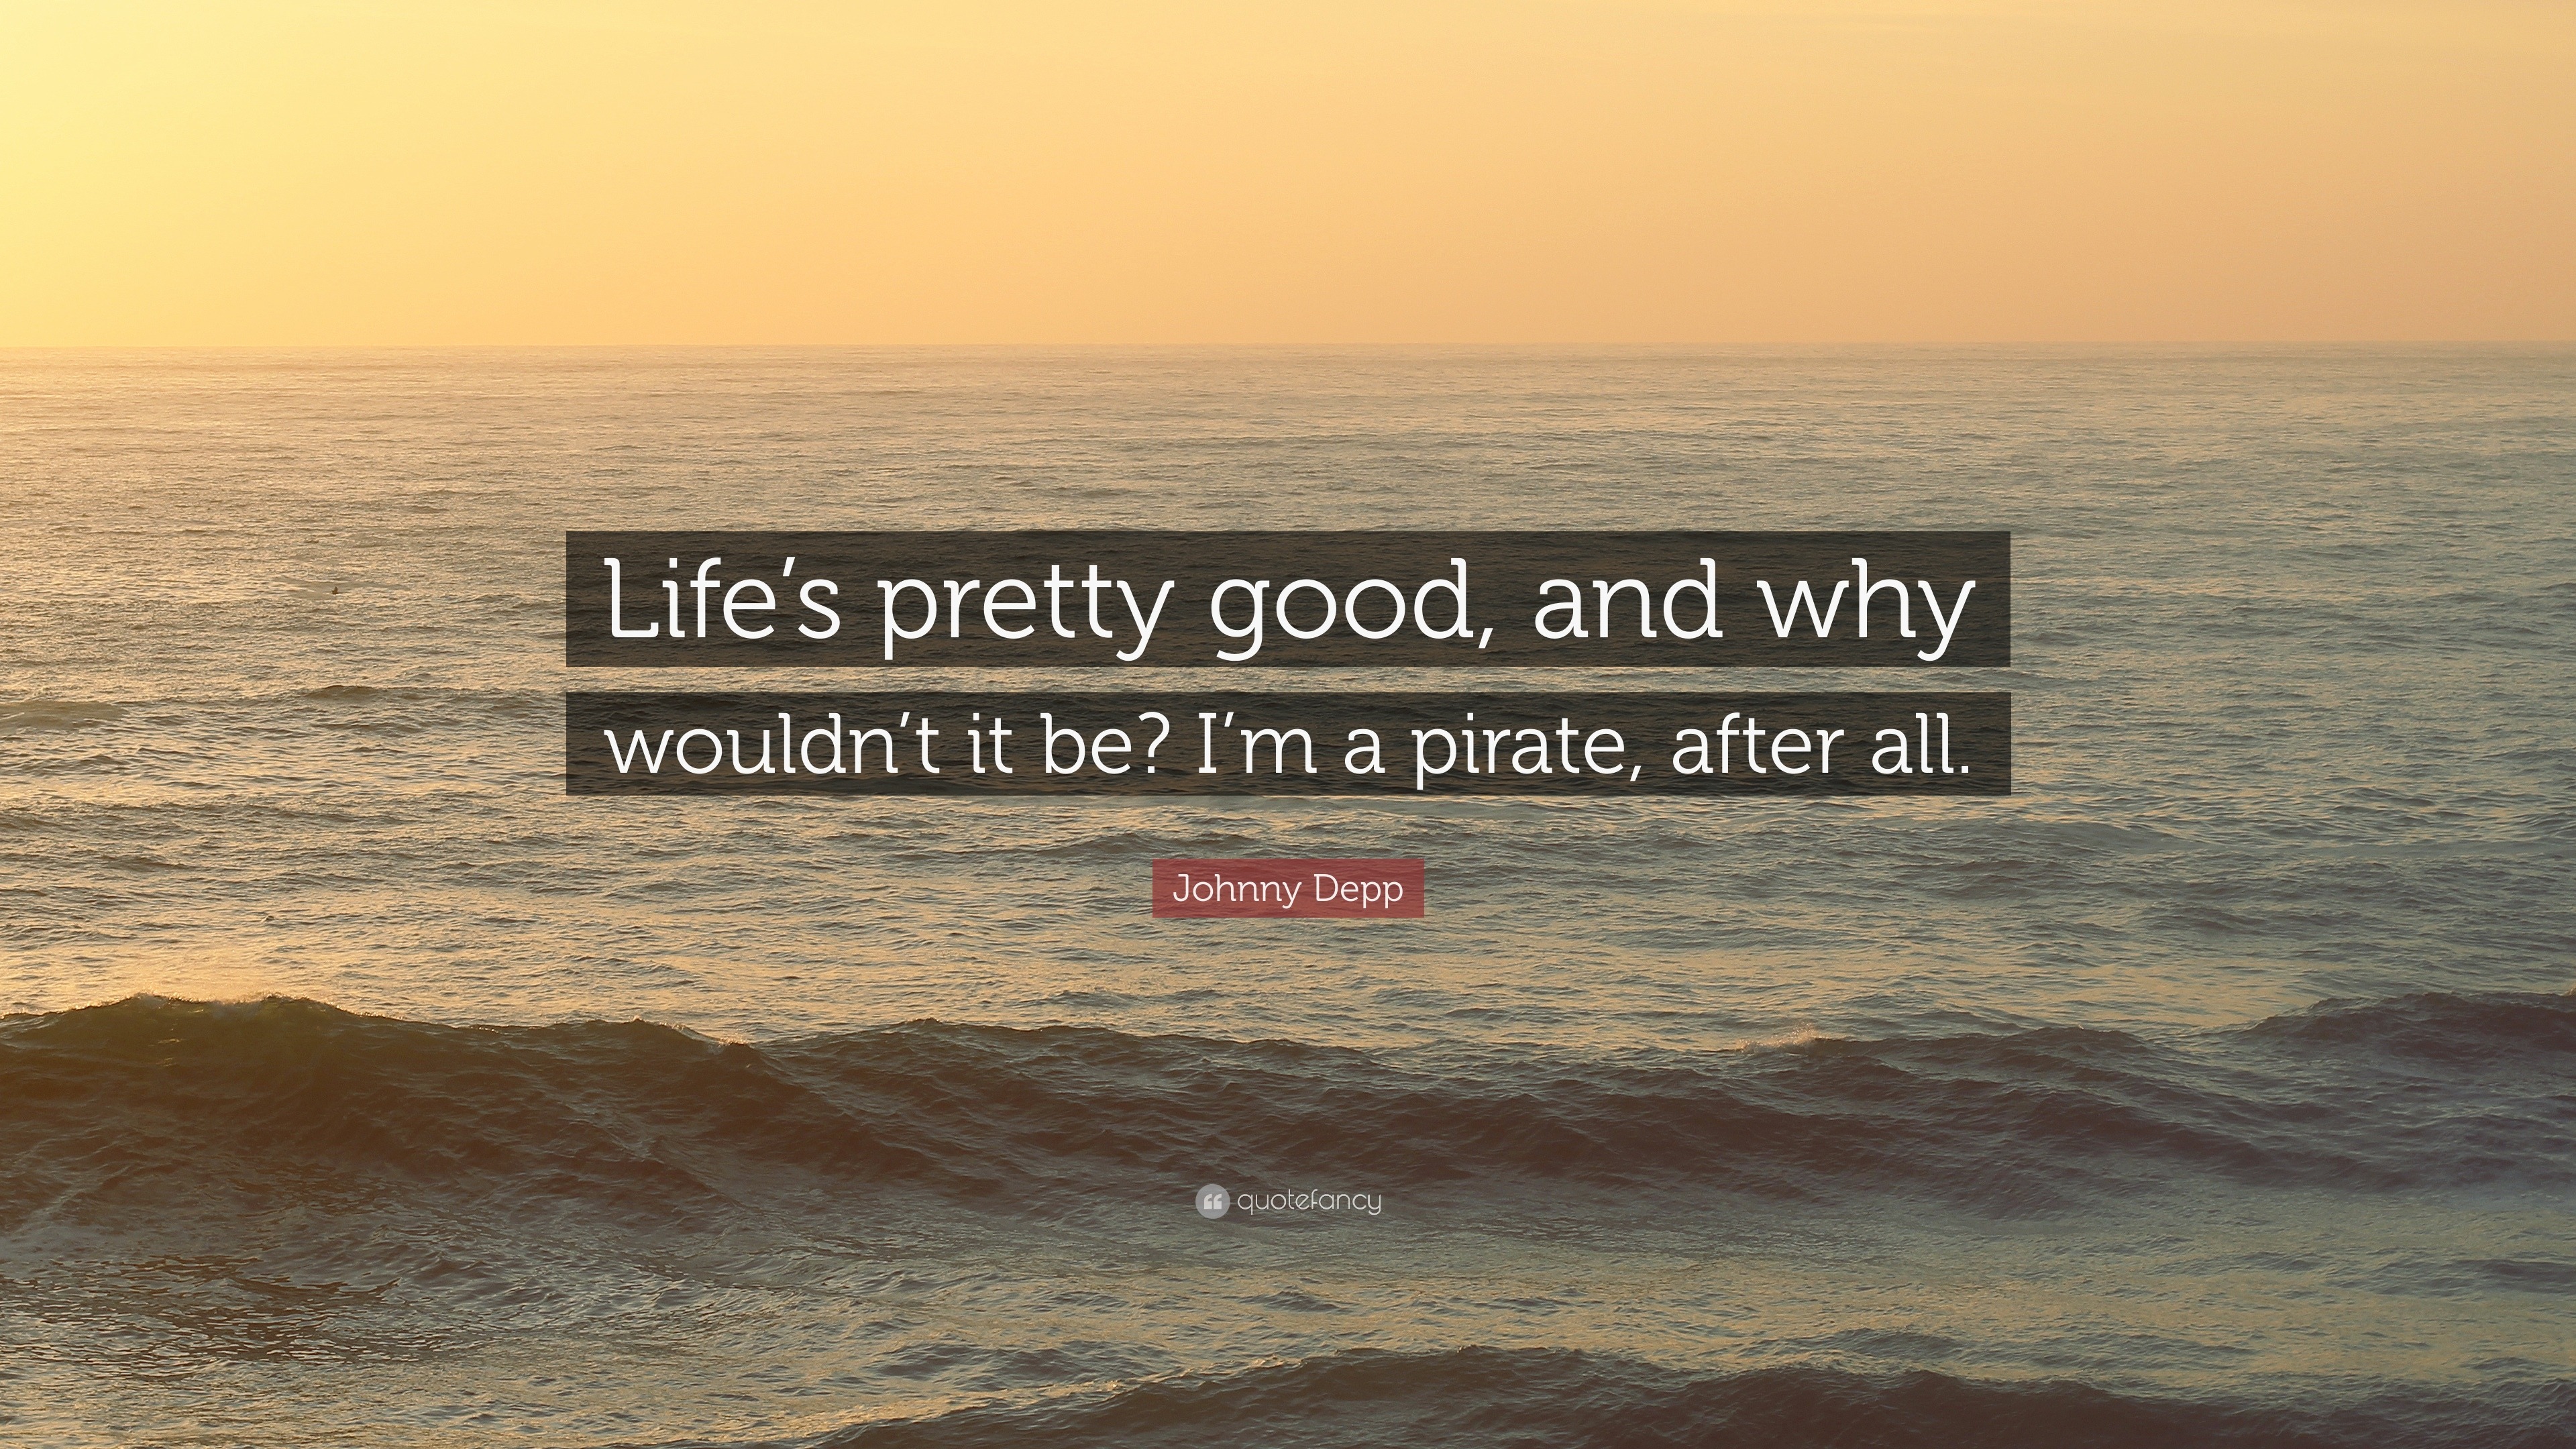 Johnny Depp Quote: “Life’s pretty good, and why wouldn’t ...